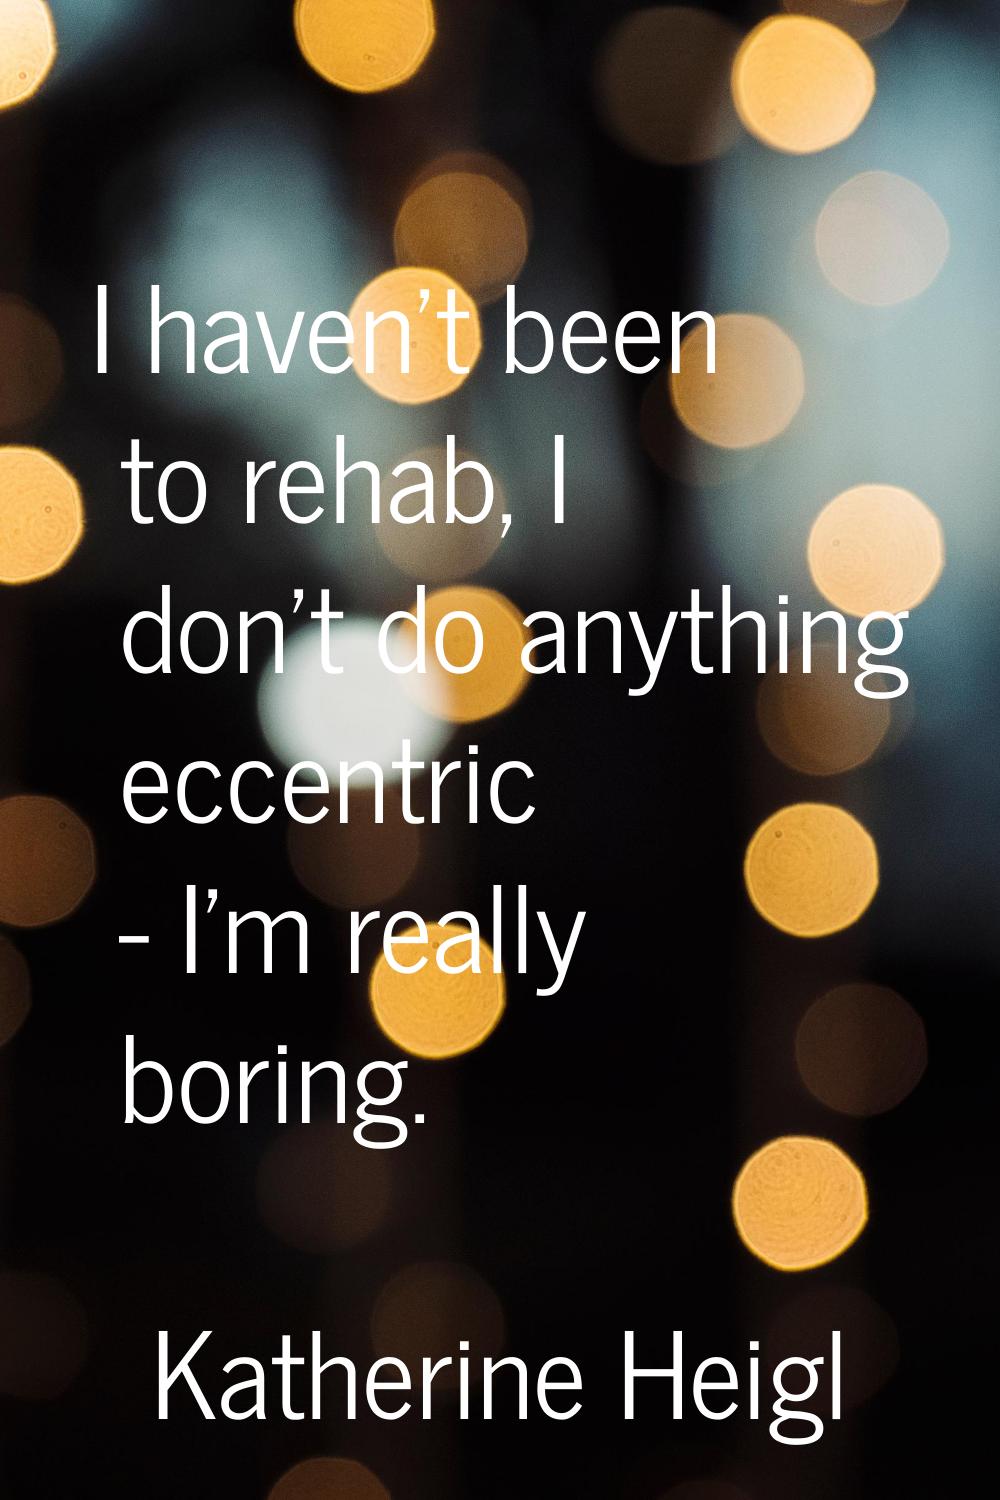 I haven't been to rehab, I don't do anything eccentric - I'm really boring.